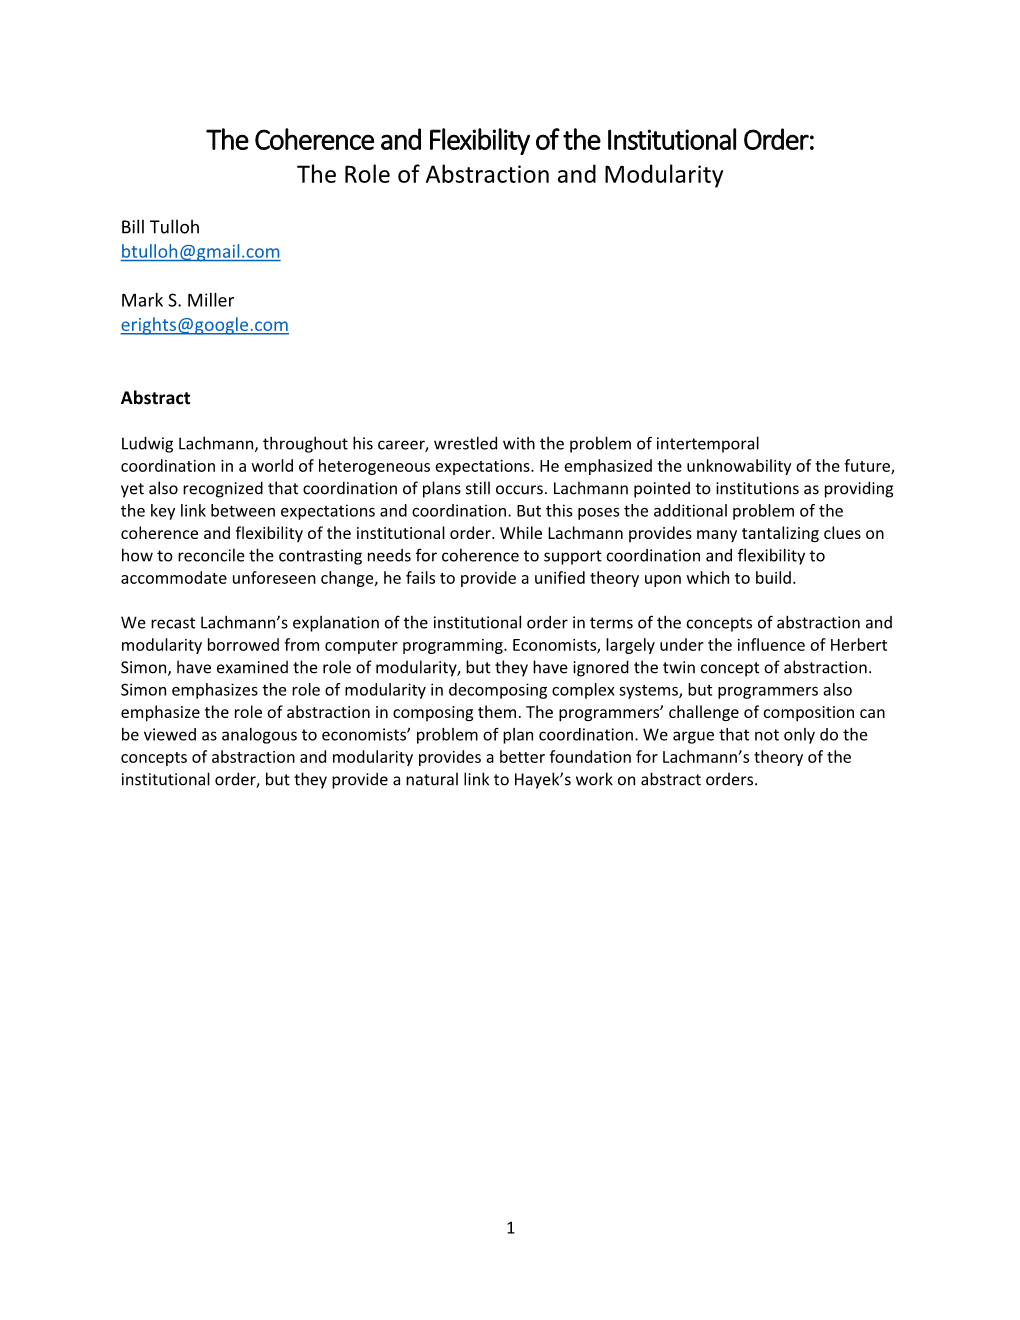 The Coherence and Flexibility of the Institutional Order: the Role of Abstraction and Modularity